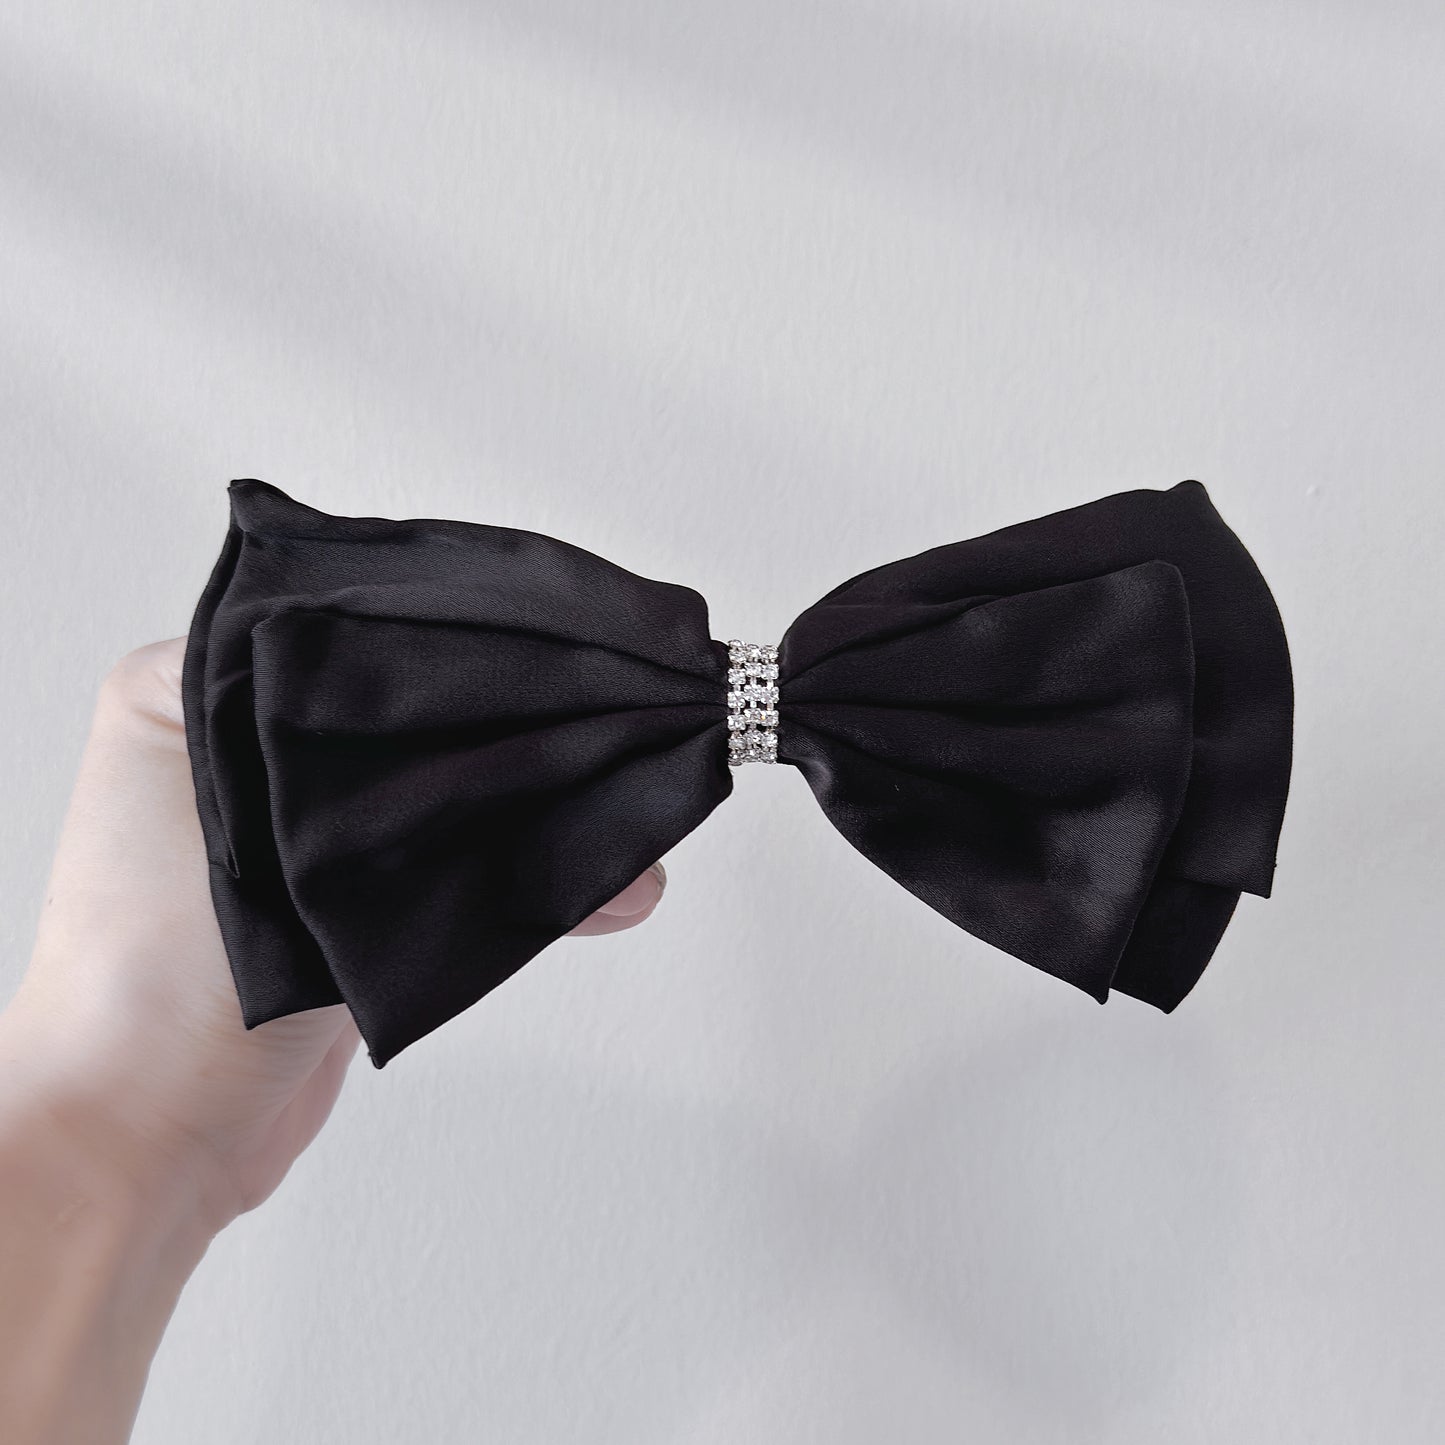 Elegant Satin Ribbon Bow Hair Accessory with Rhinestone Detail – Versatile and Chic